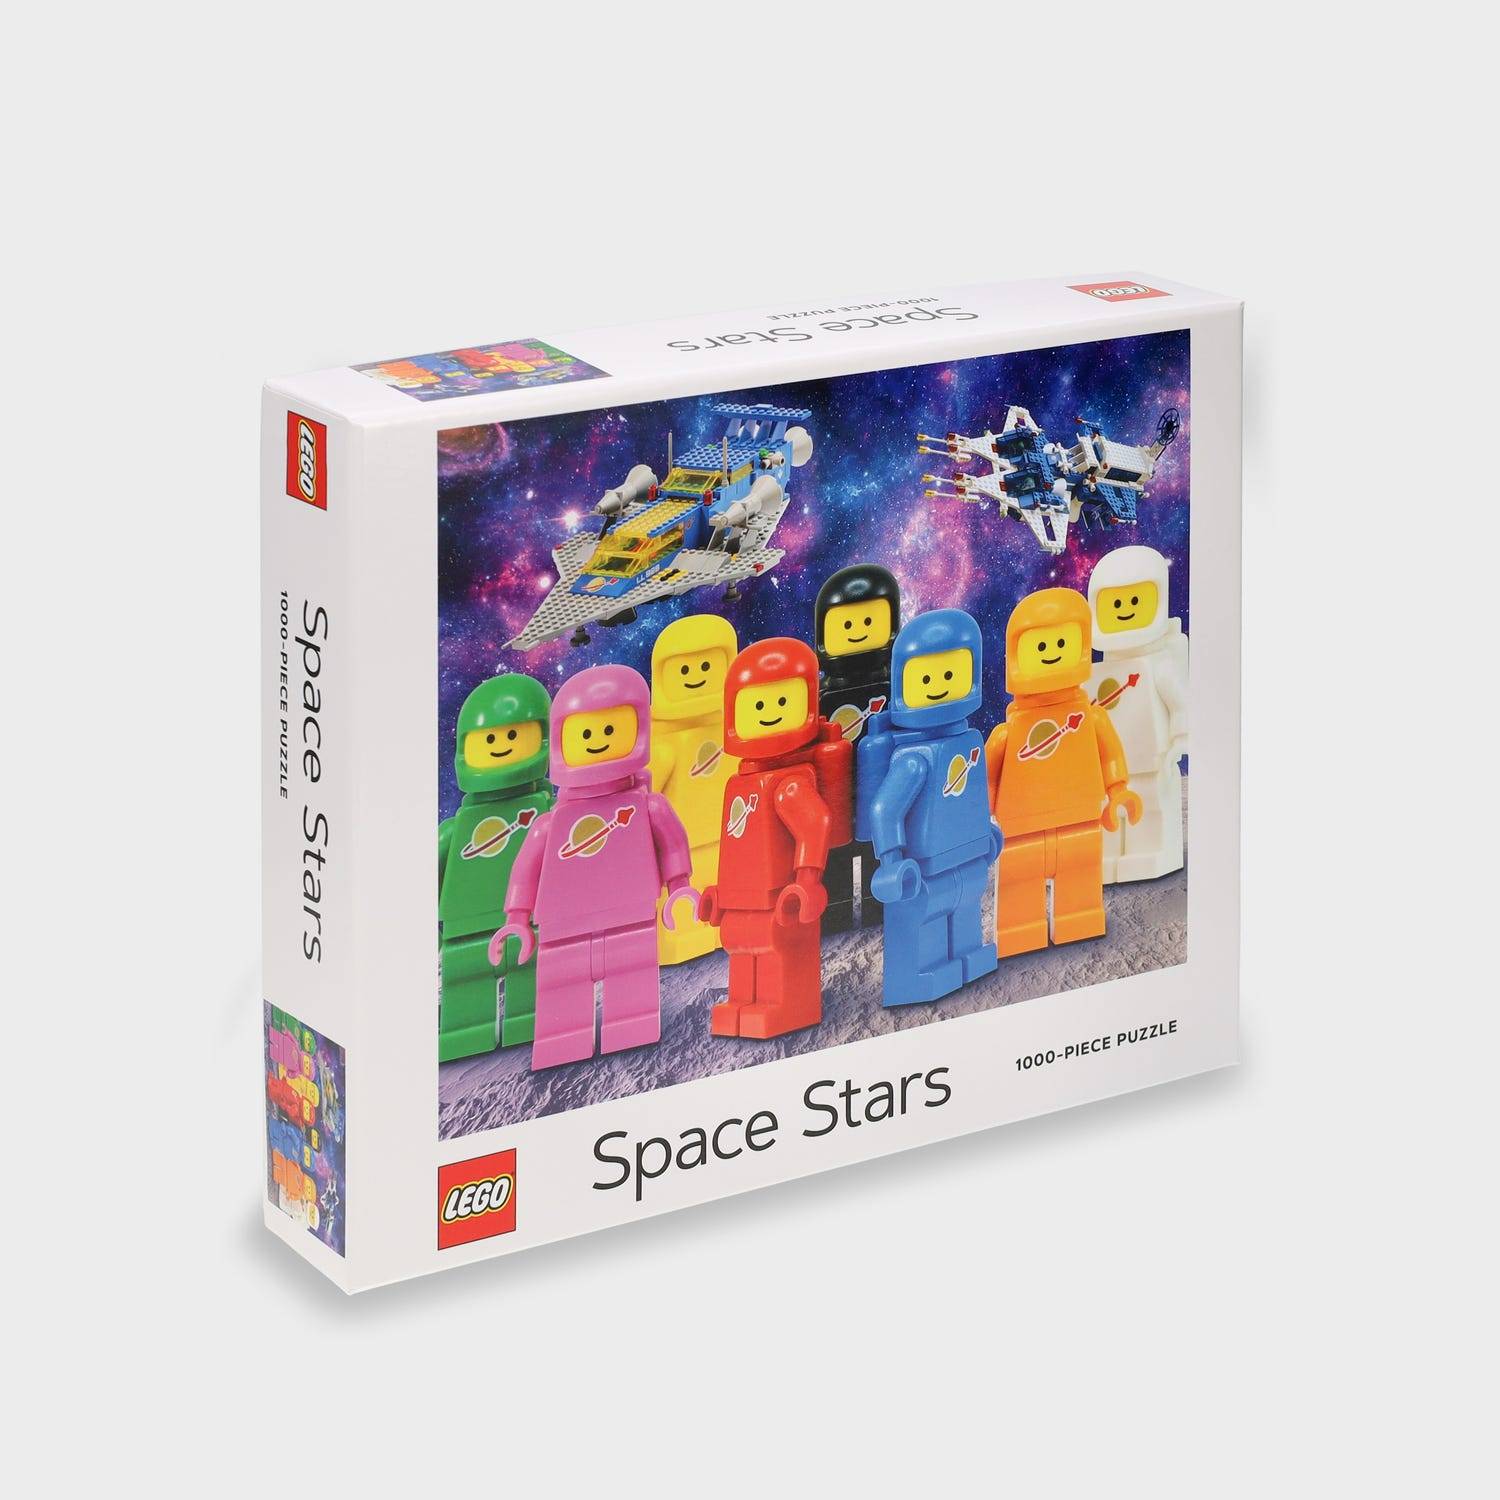 The 1000-piece space stars puzzle.